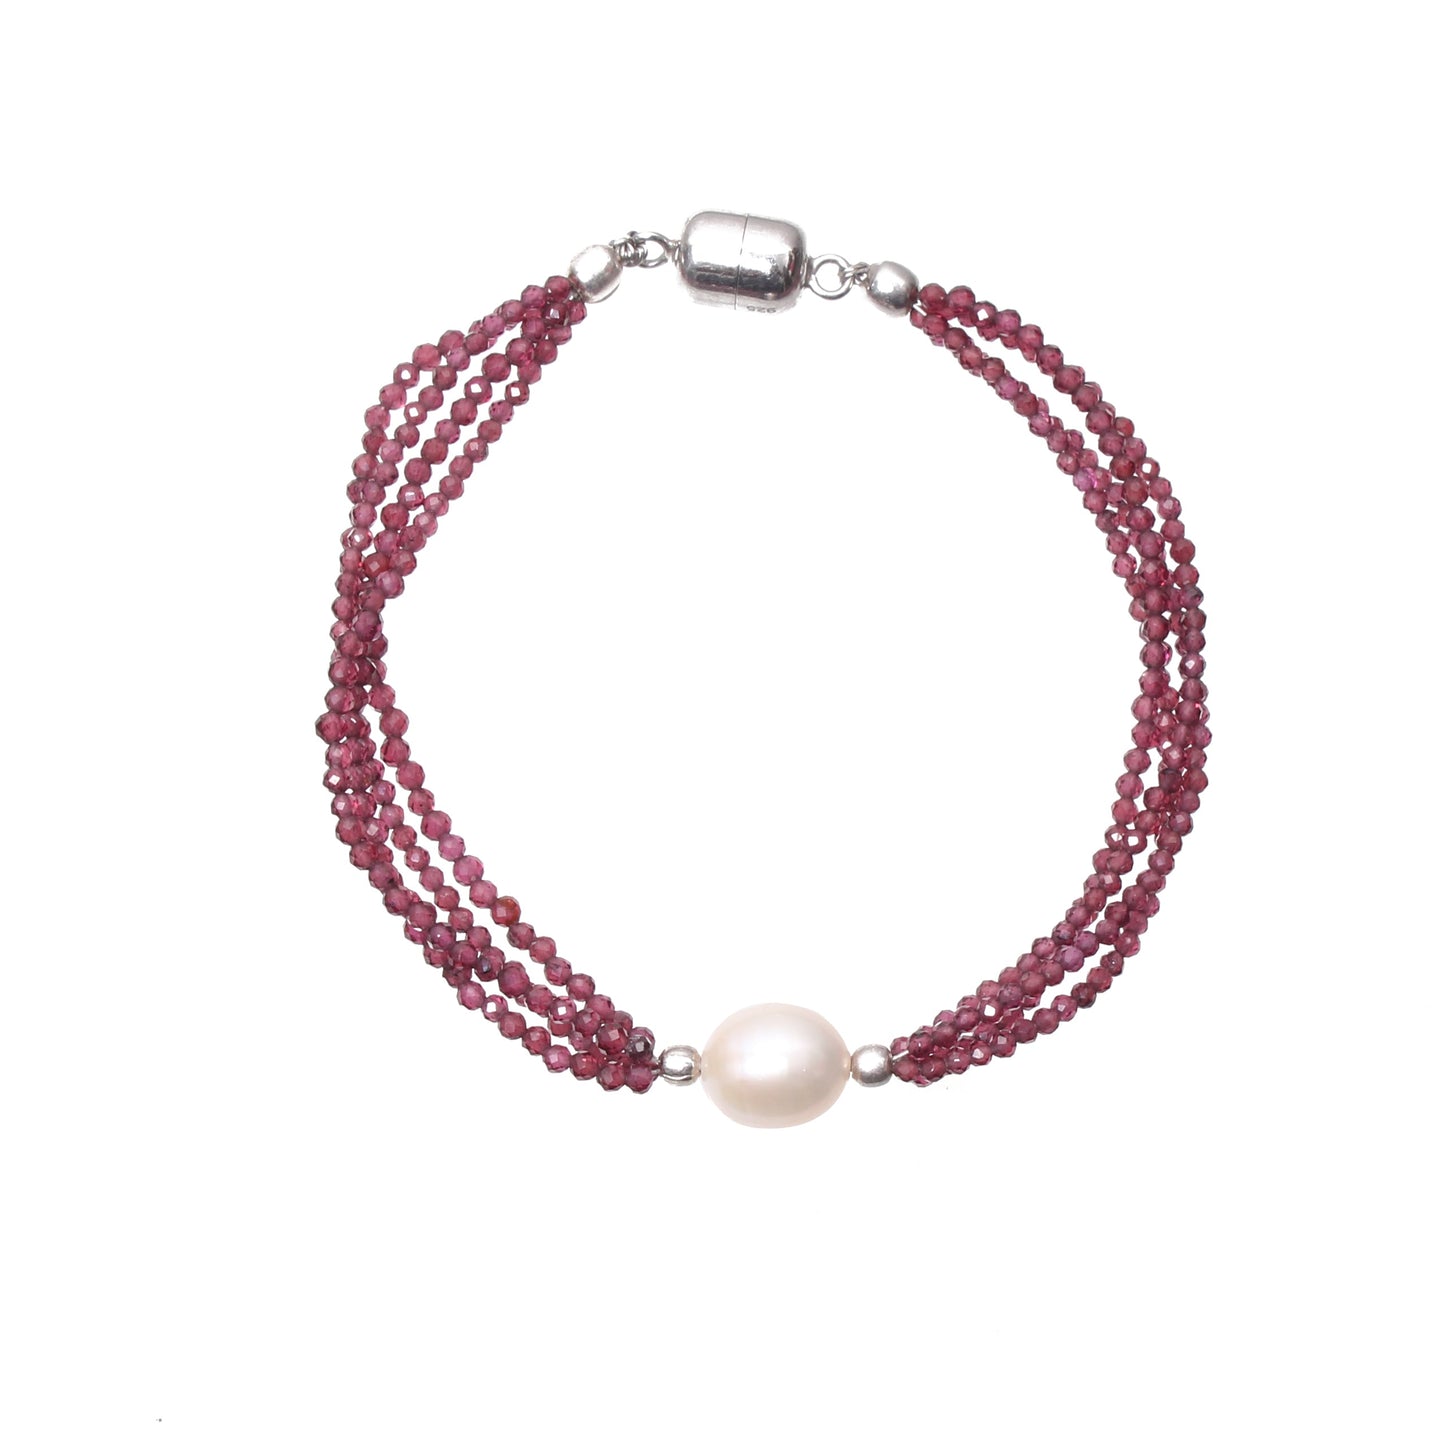 Garnet and Freshwater Pearl Beads Silver Bracelet With Magnetic Lock GemsRush